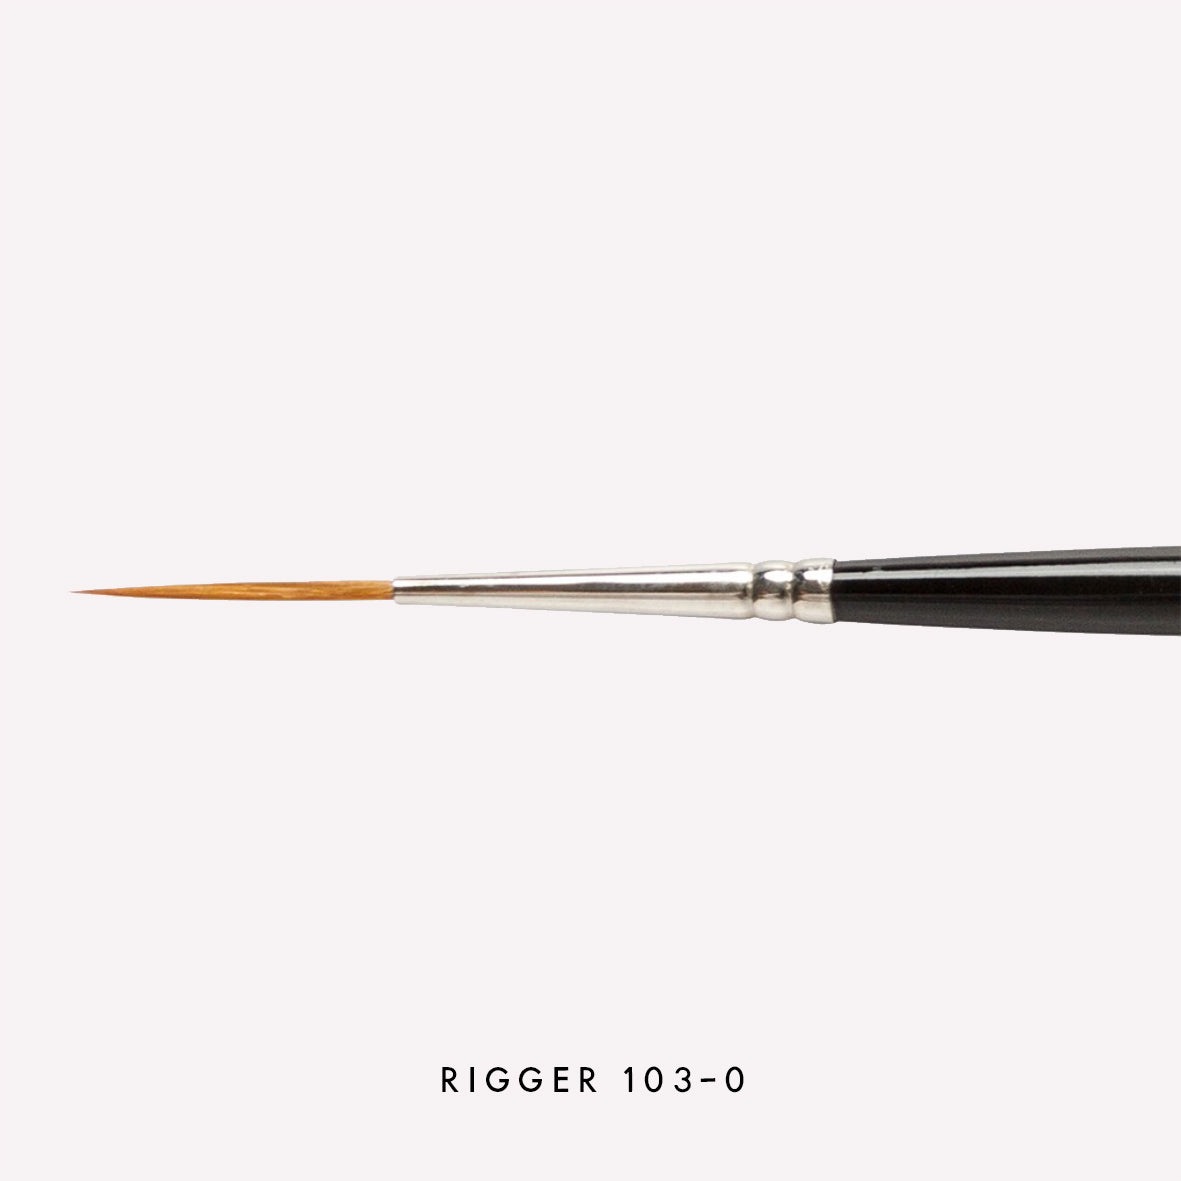 Pro Arte’s Prolene rigger  paintbrush in size 103-0 . Brushes have long synthetic bristles, an ergonomic  black handle and a silver ferrule. 